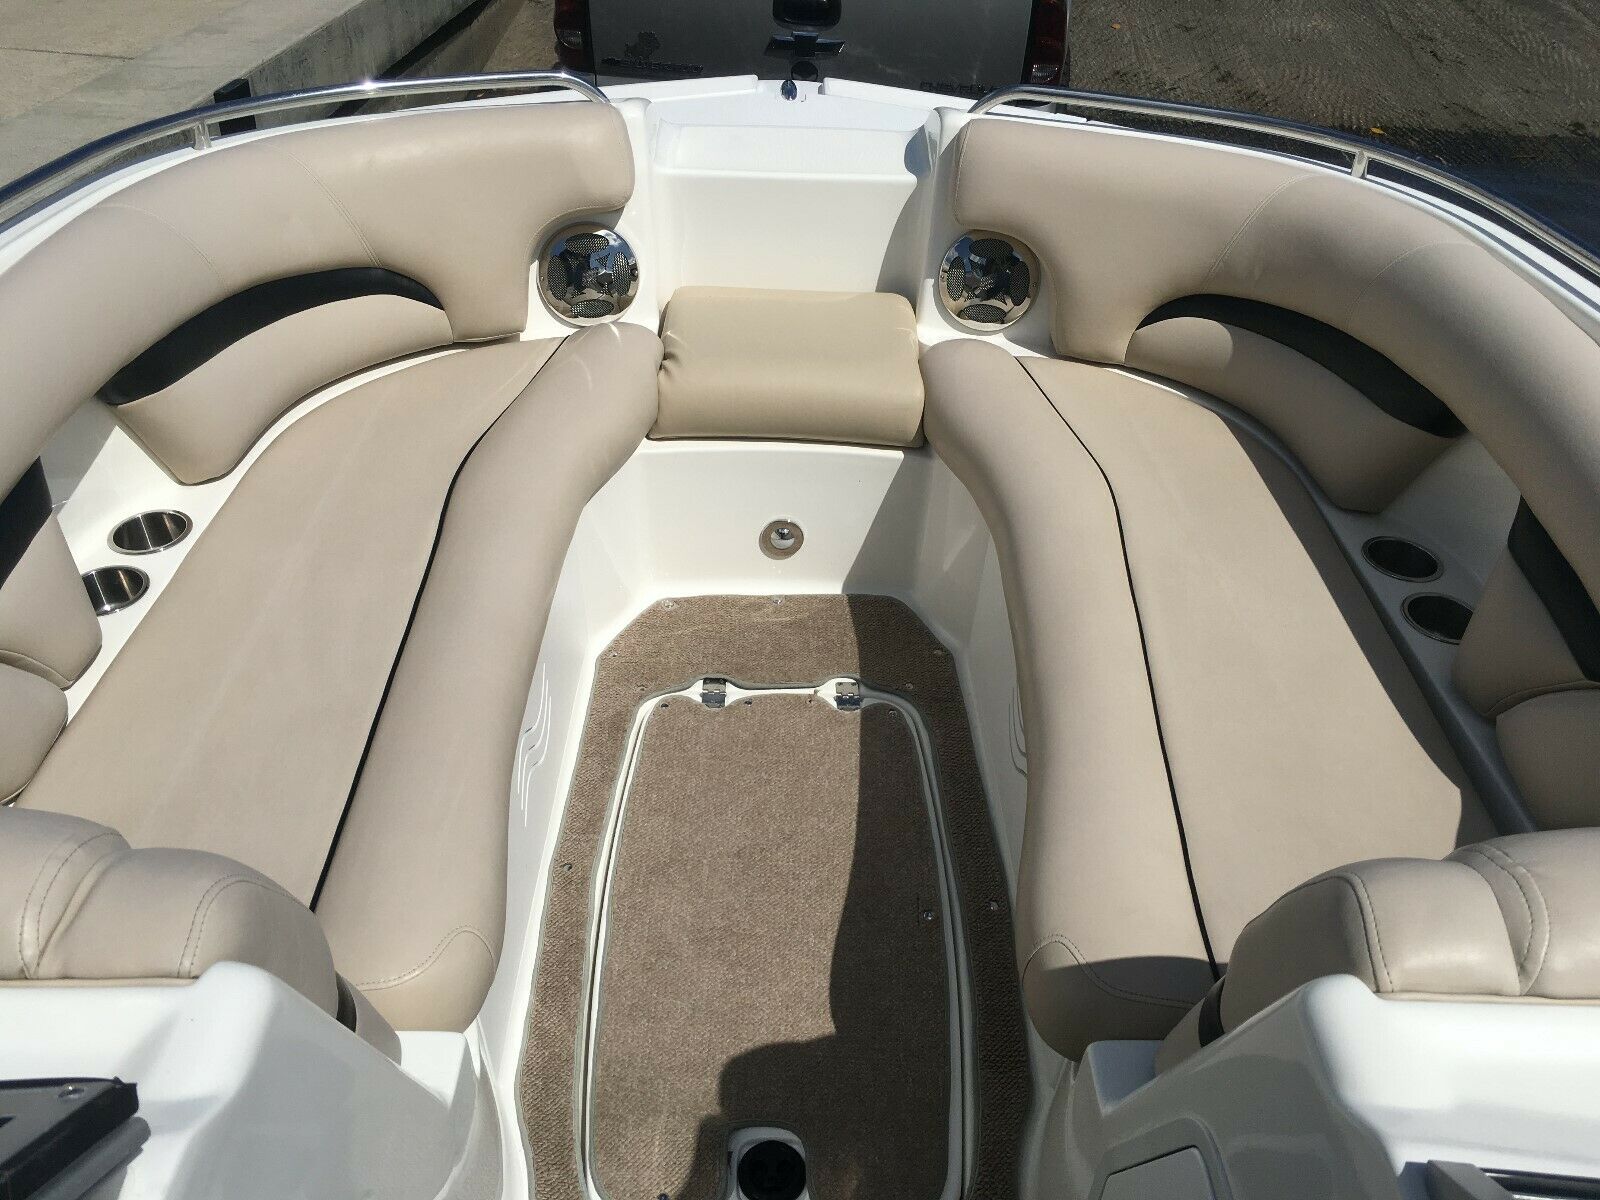 hurricane 2600 sun deck 2011 for sale for $34,900 - boats